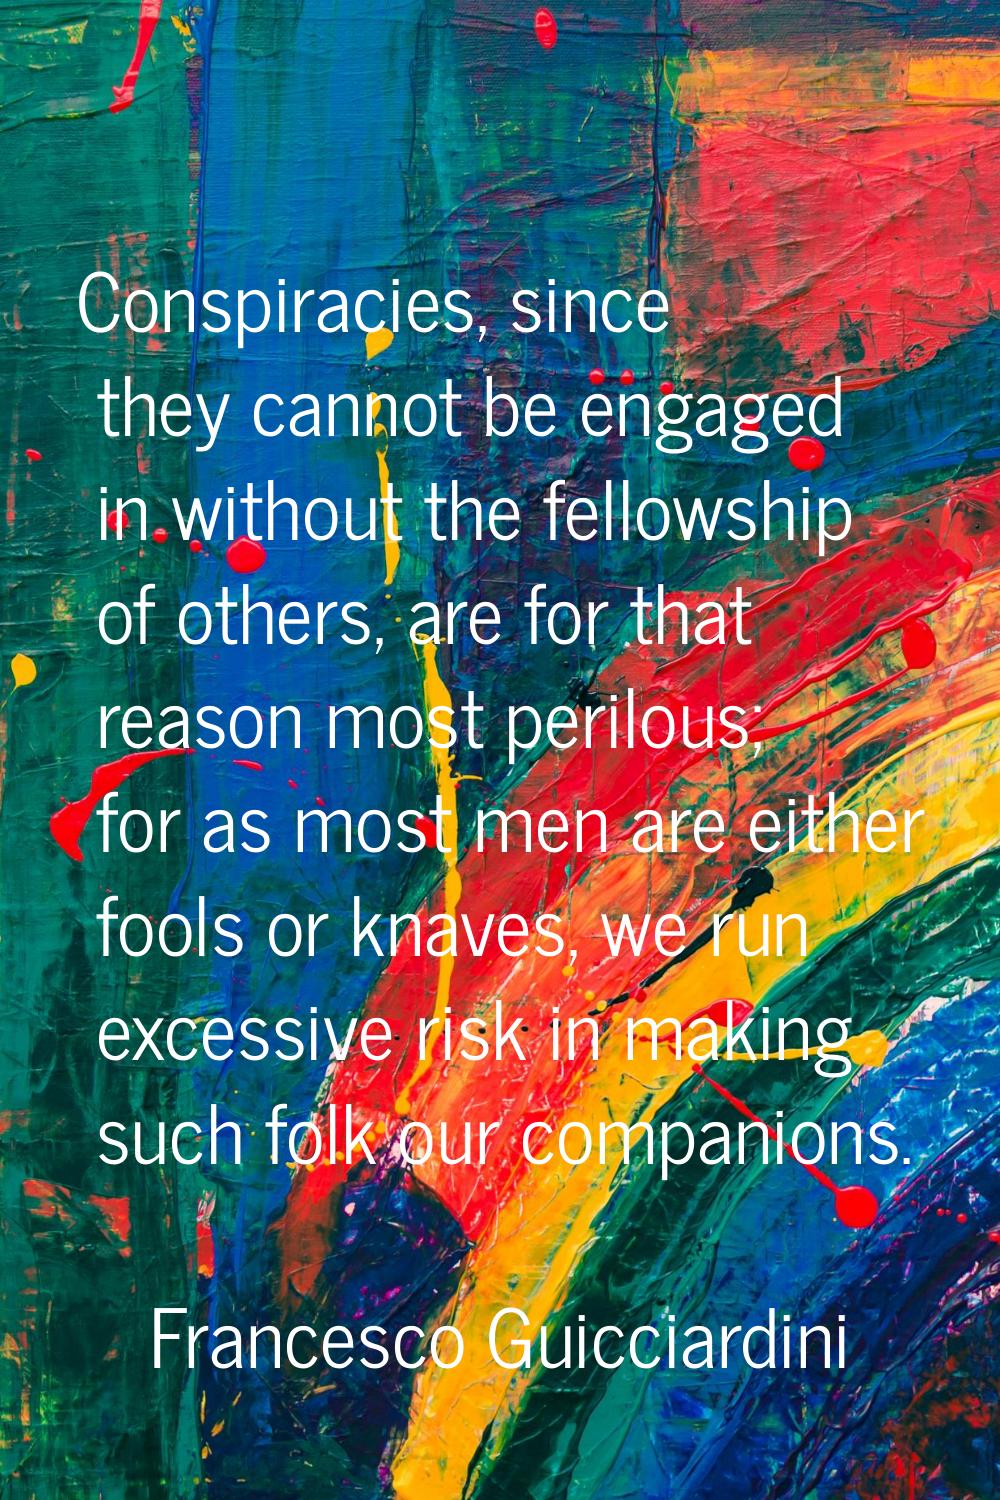 Conspiracies, since they cannot be engaged in without the fellowship of others, are for that reason